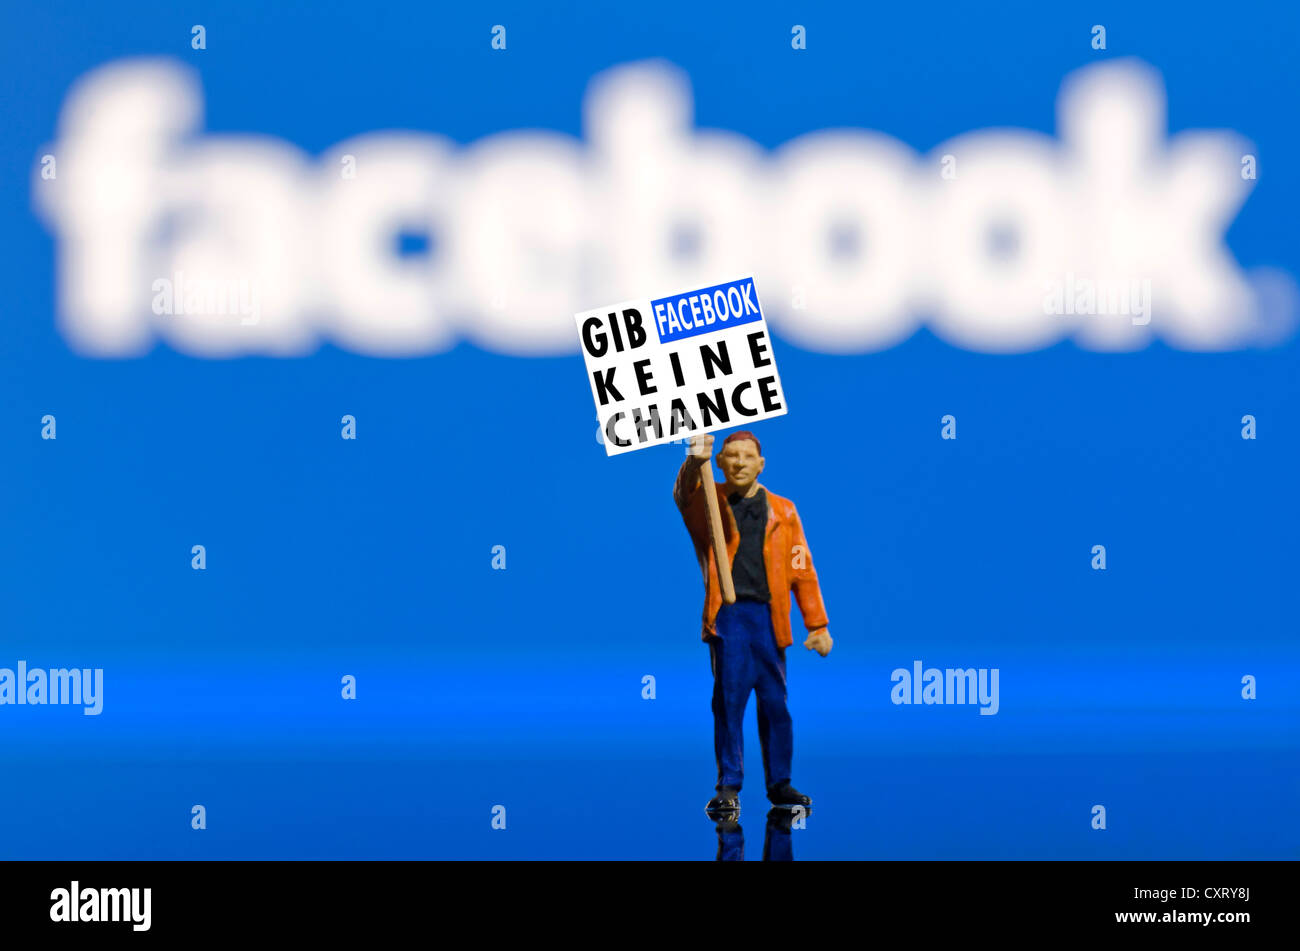 Protester holding a board, lettering 'Gib Facebook keine Chance', German for 'No chance for Facebook', miniature figure standing Stock Photo